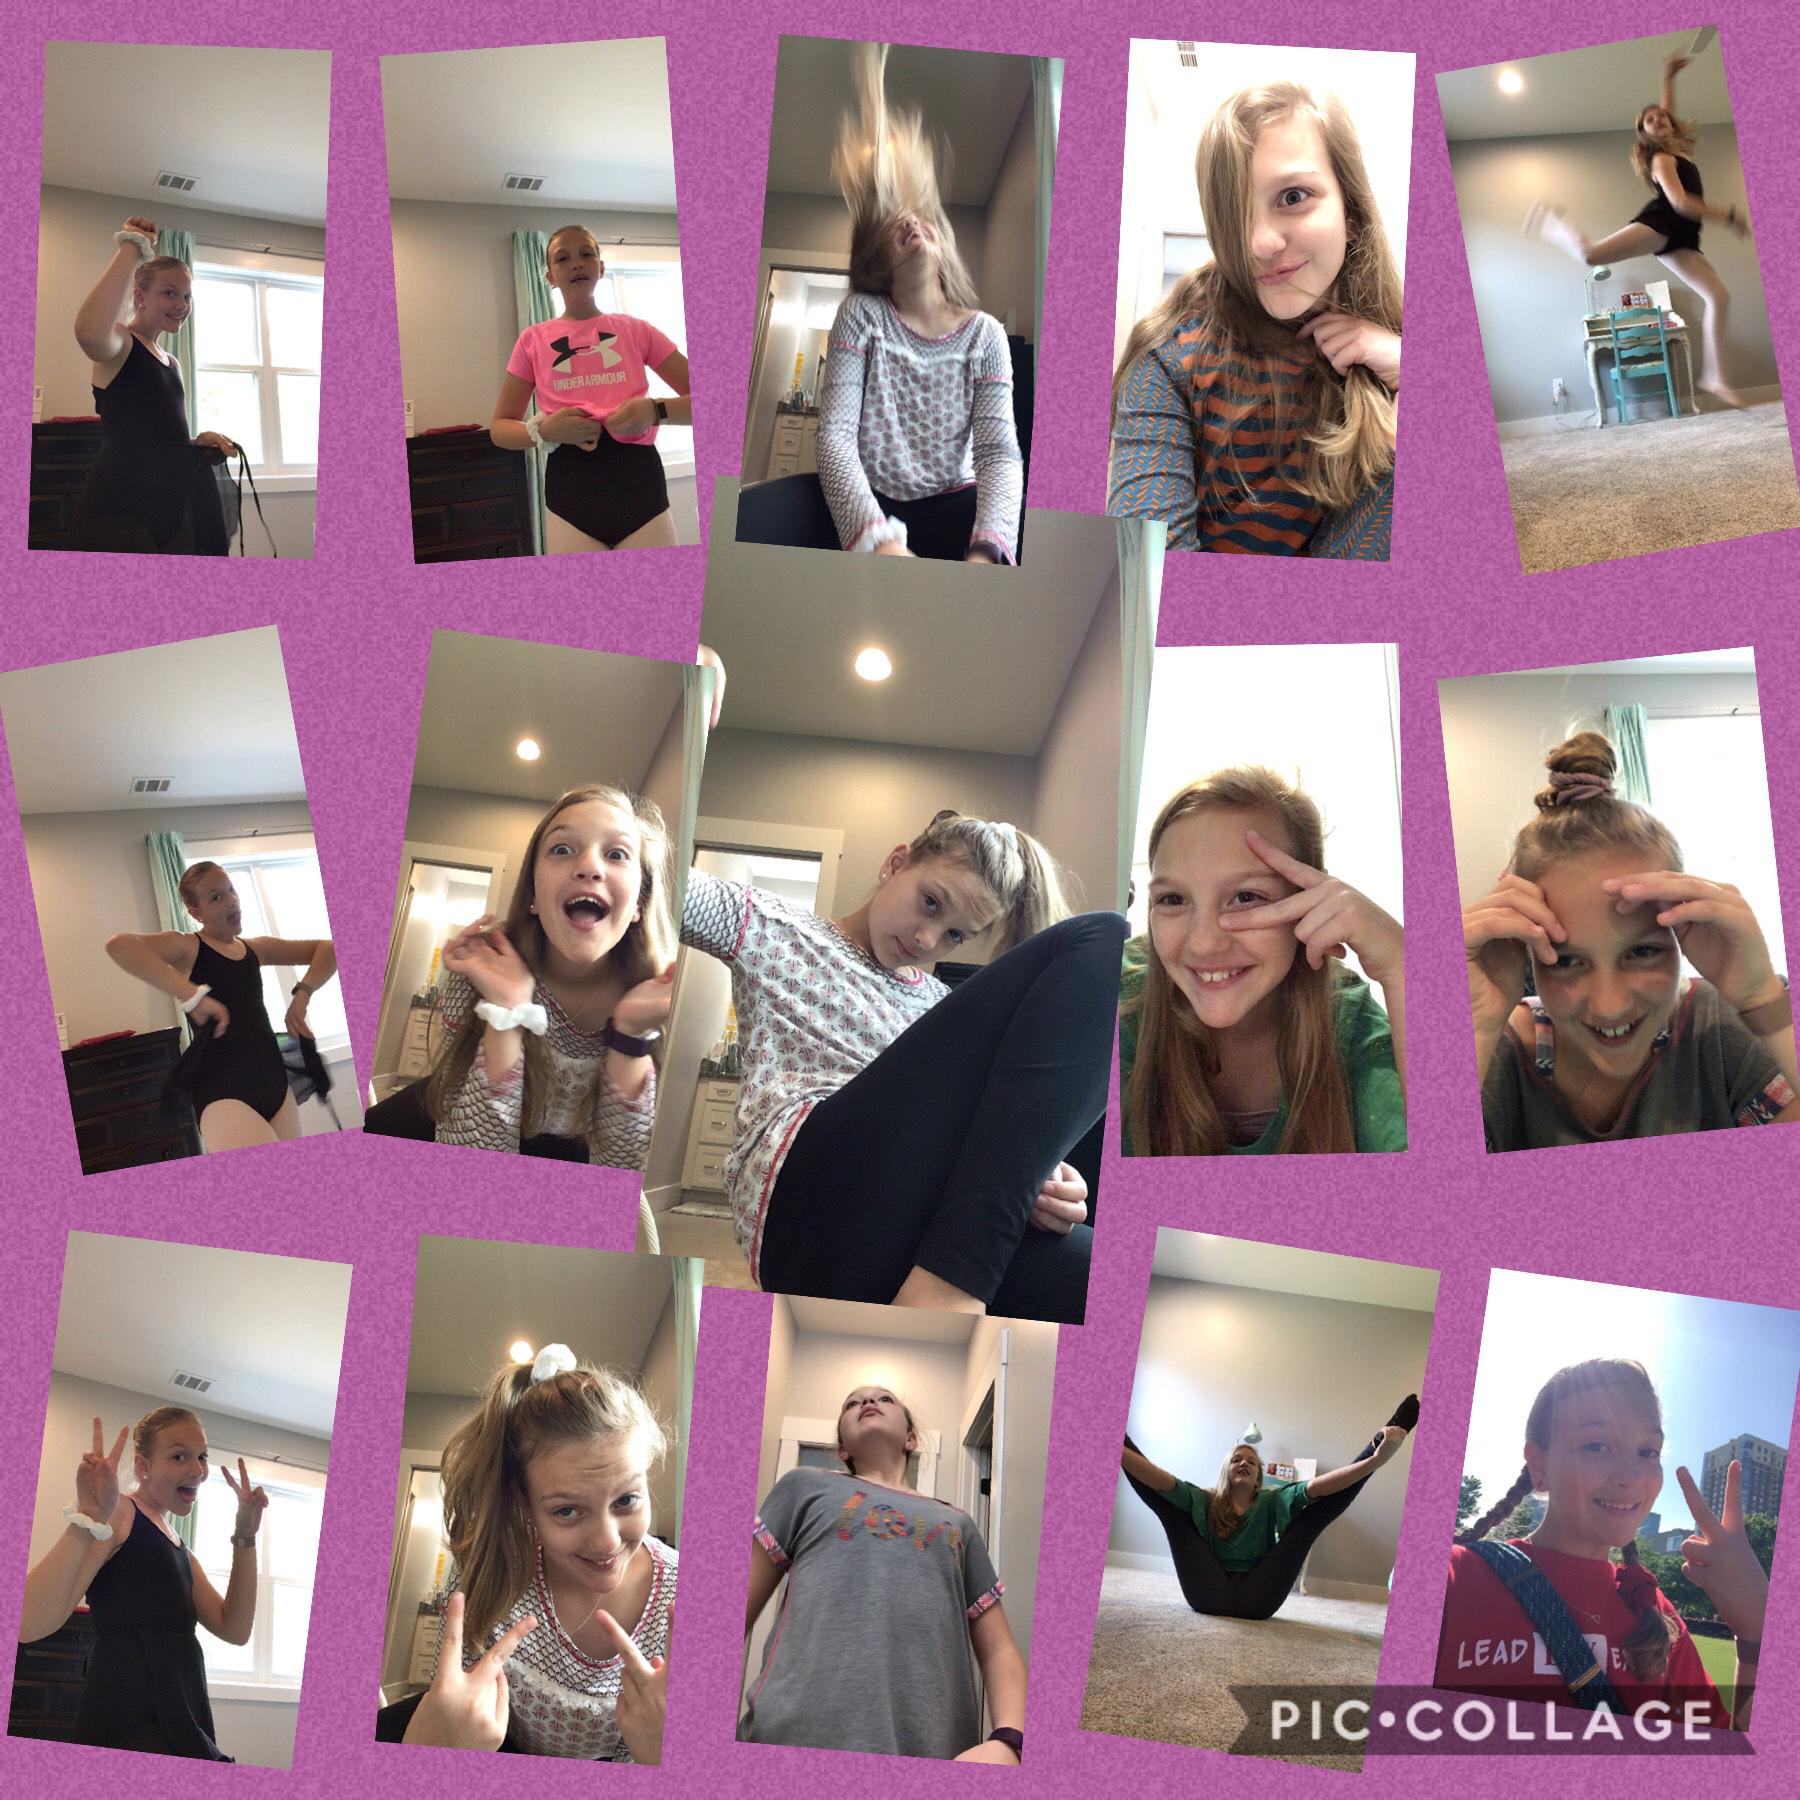 Silly photos of my friend